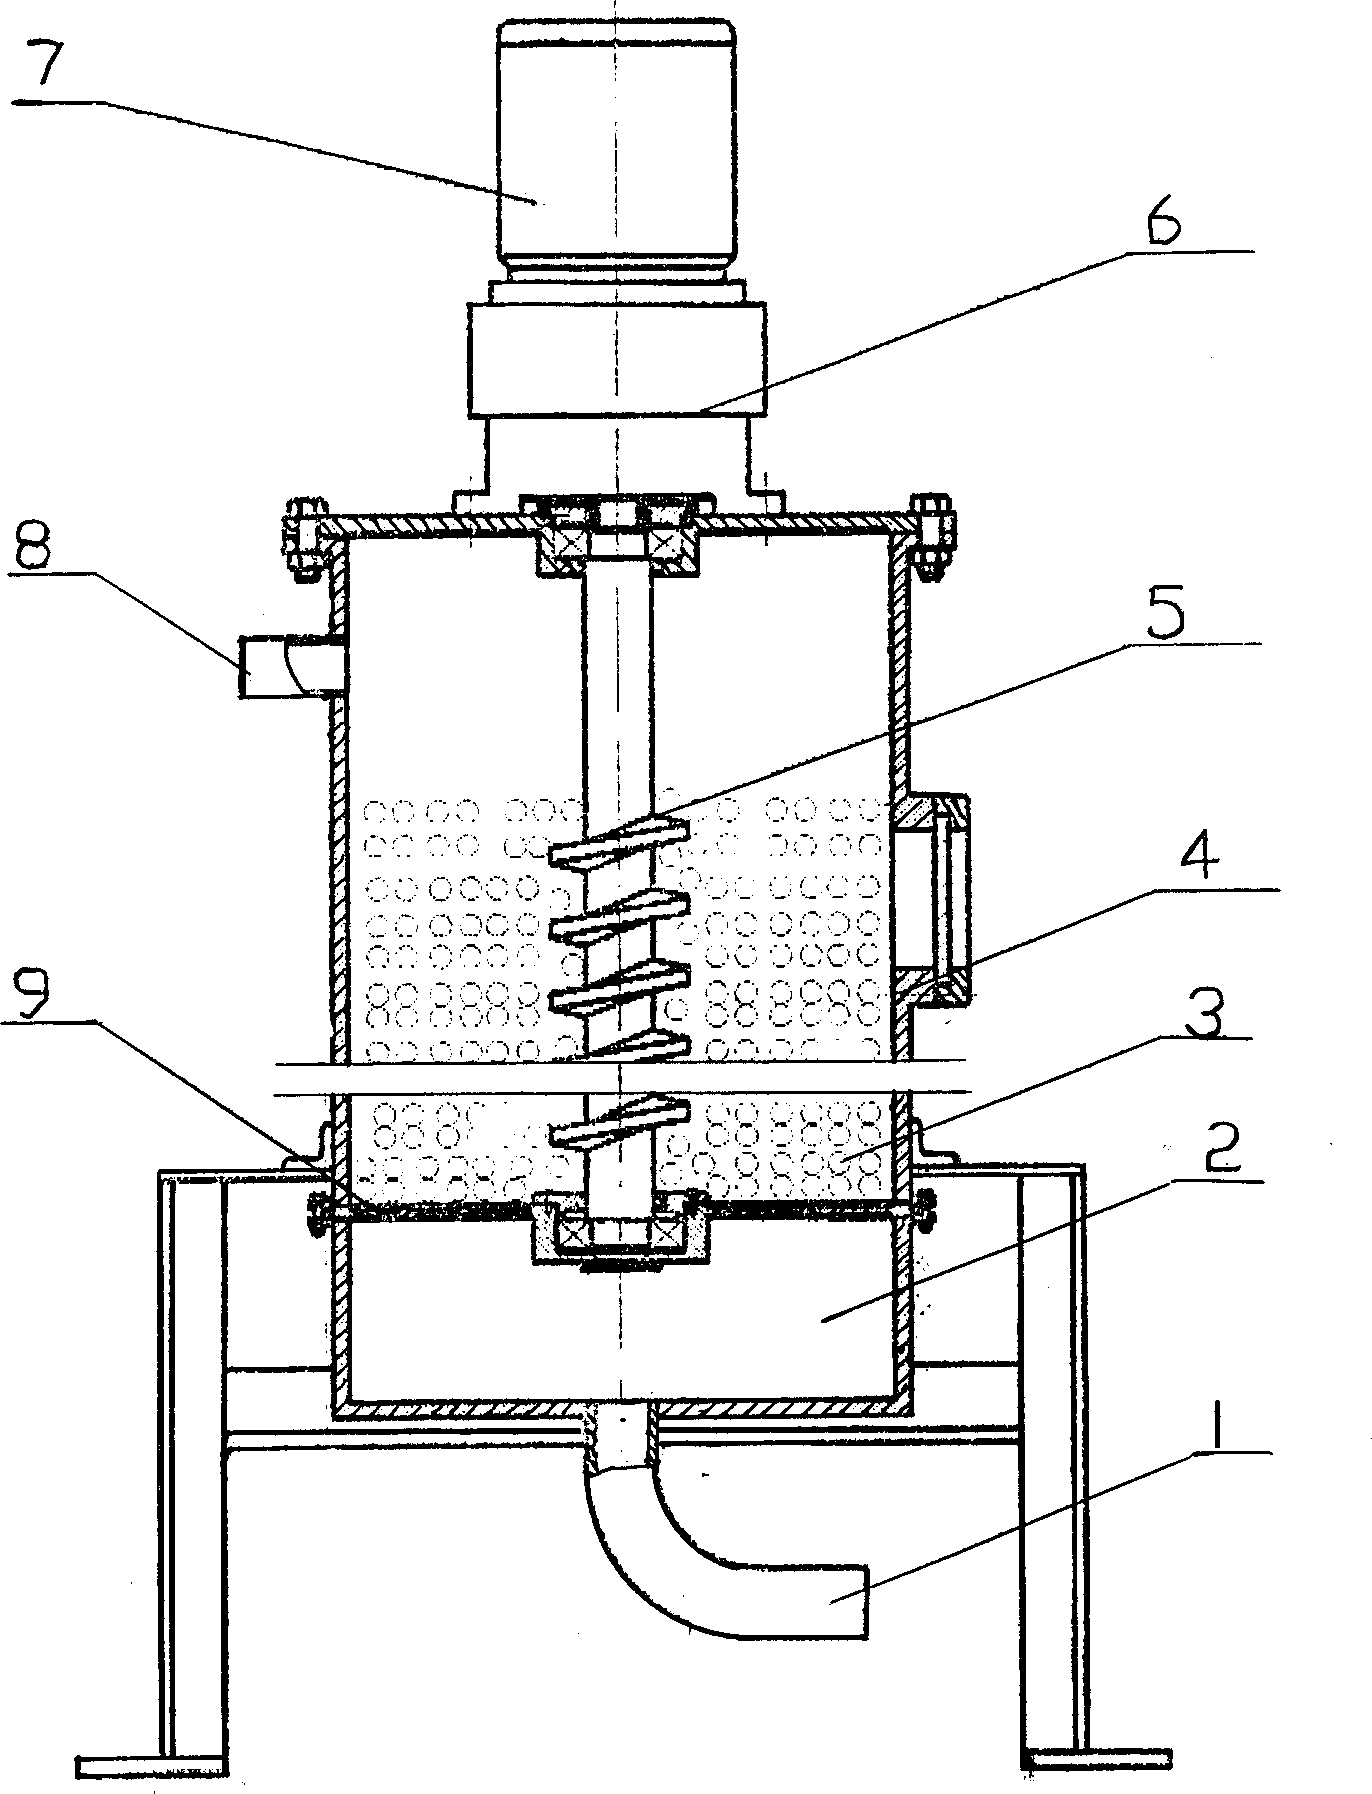 Abrading type oil and water separator for crude oil